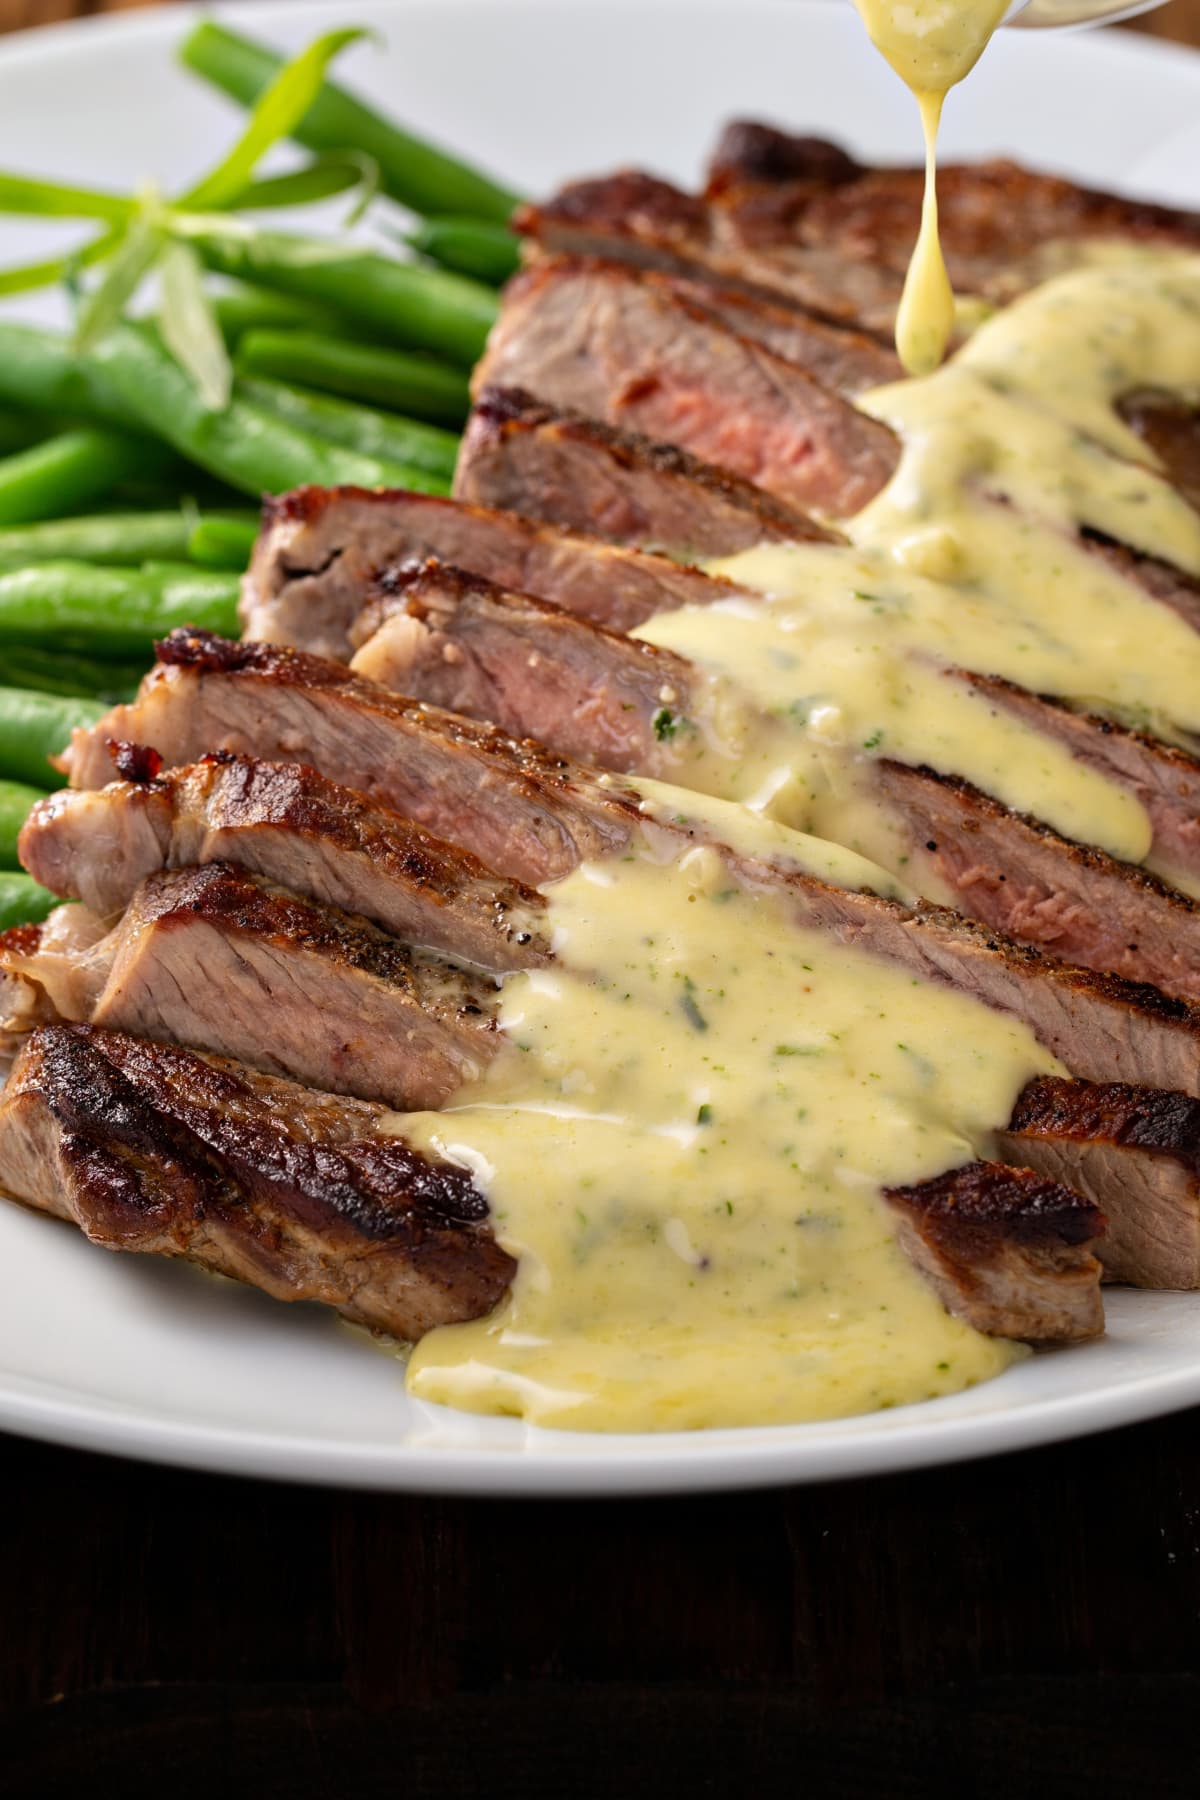 Sliced steak on a white plate with bearnaise sauce made with tarragon with vegetables in the background